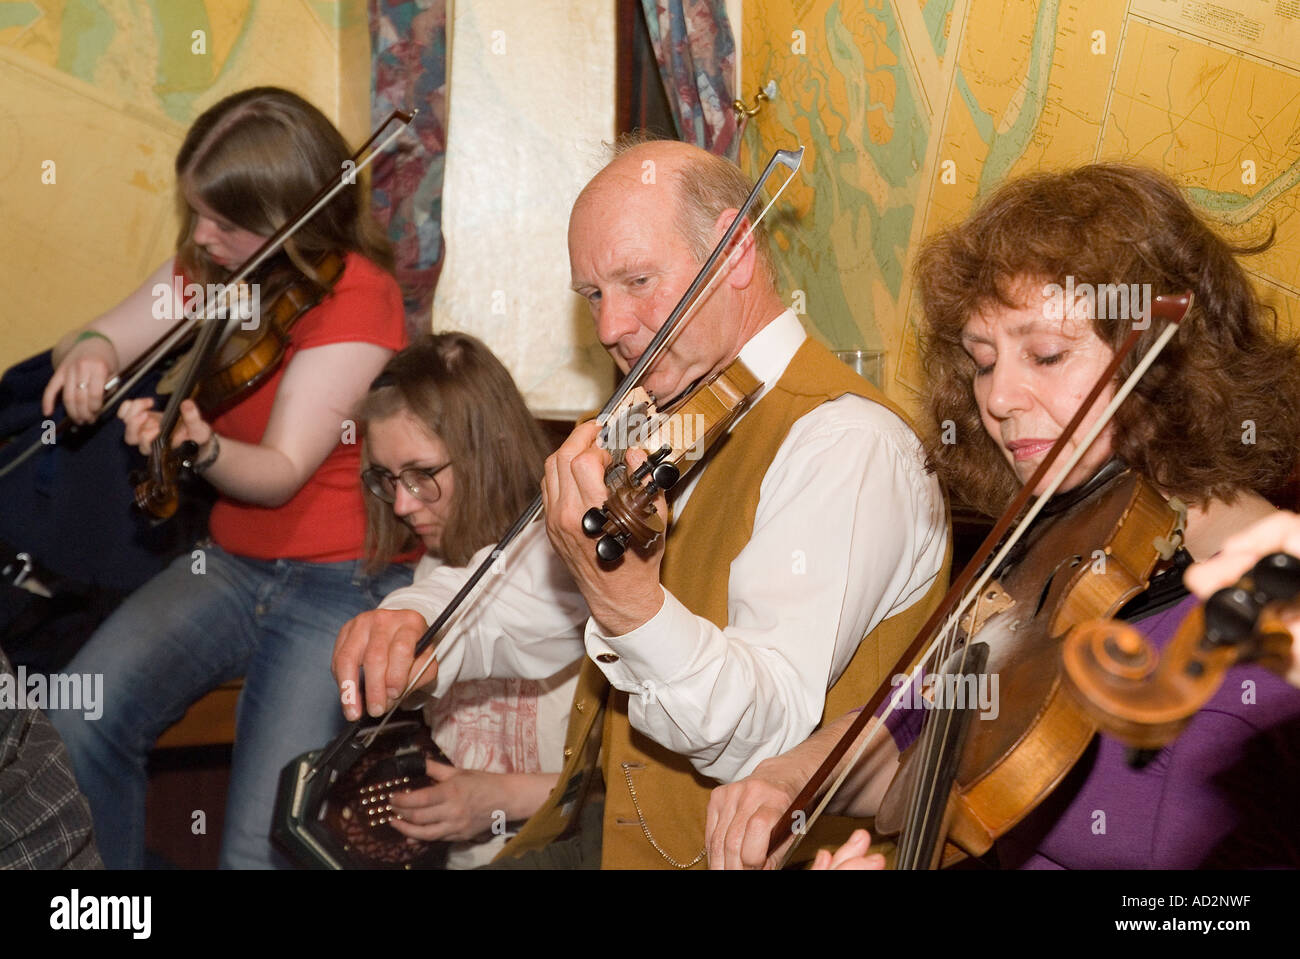 dh Folk Festival STROMNESS ORKNEY Musicians playing musical instrument public house scottish culture event play pub fiddle music session scotland Stock Photo